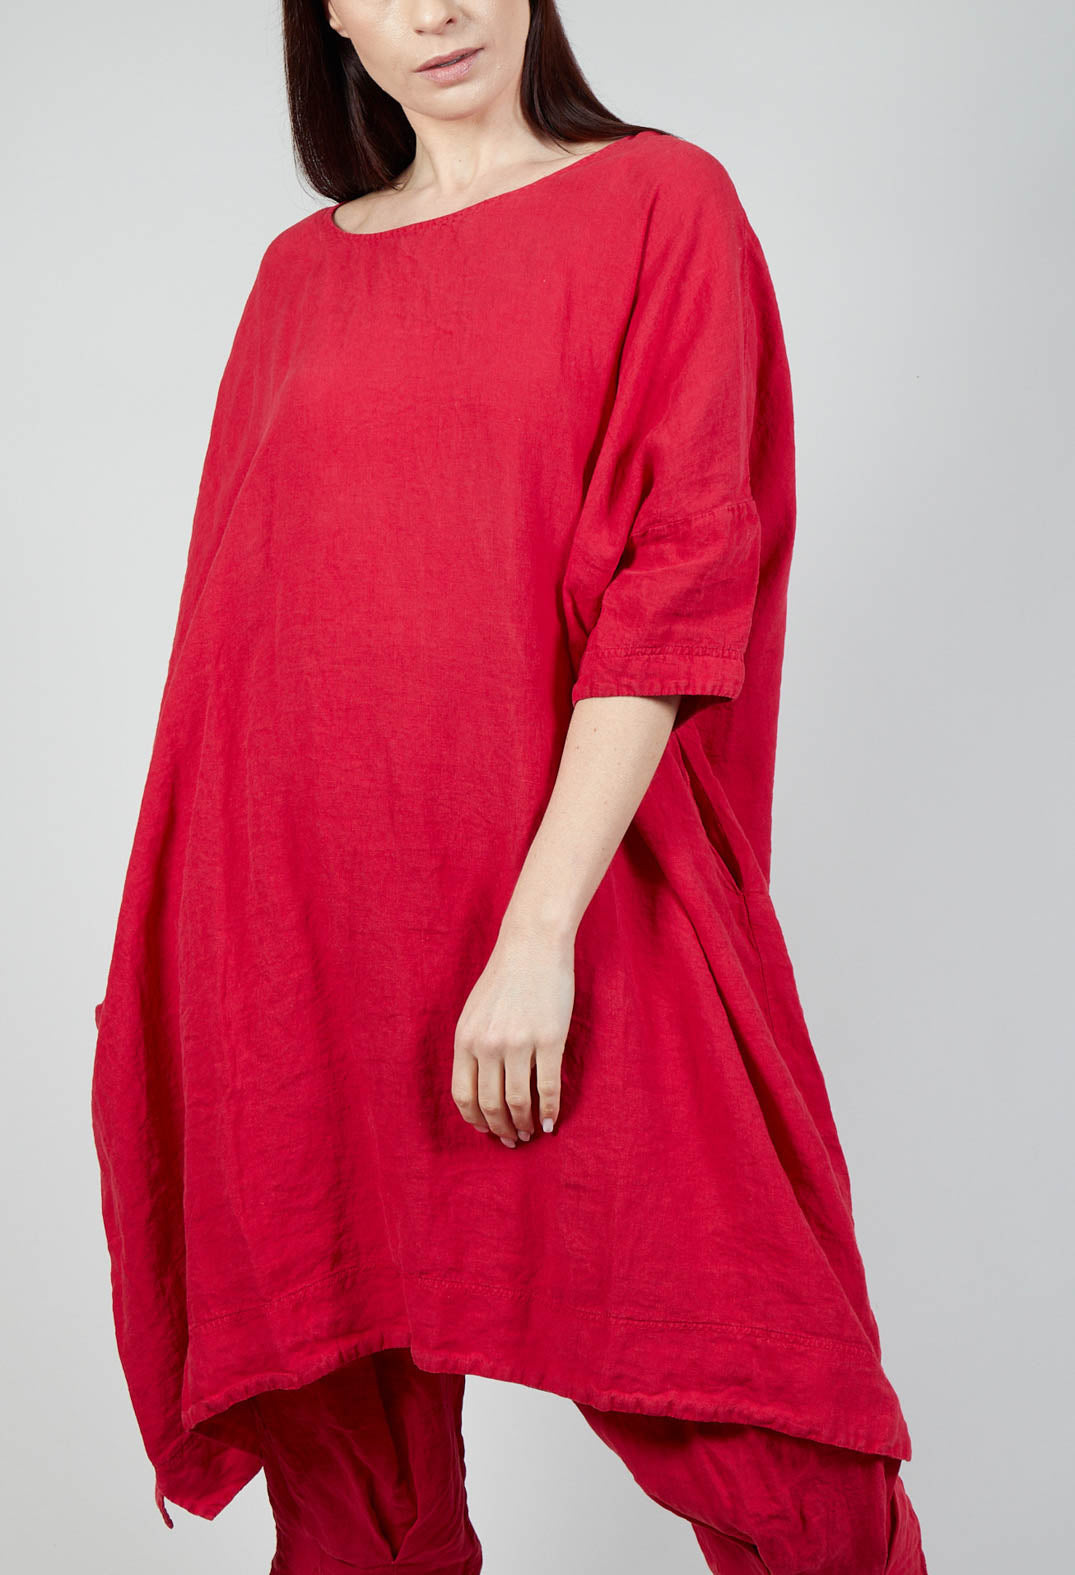 Boxy Fit Linen Dress in Chili